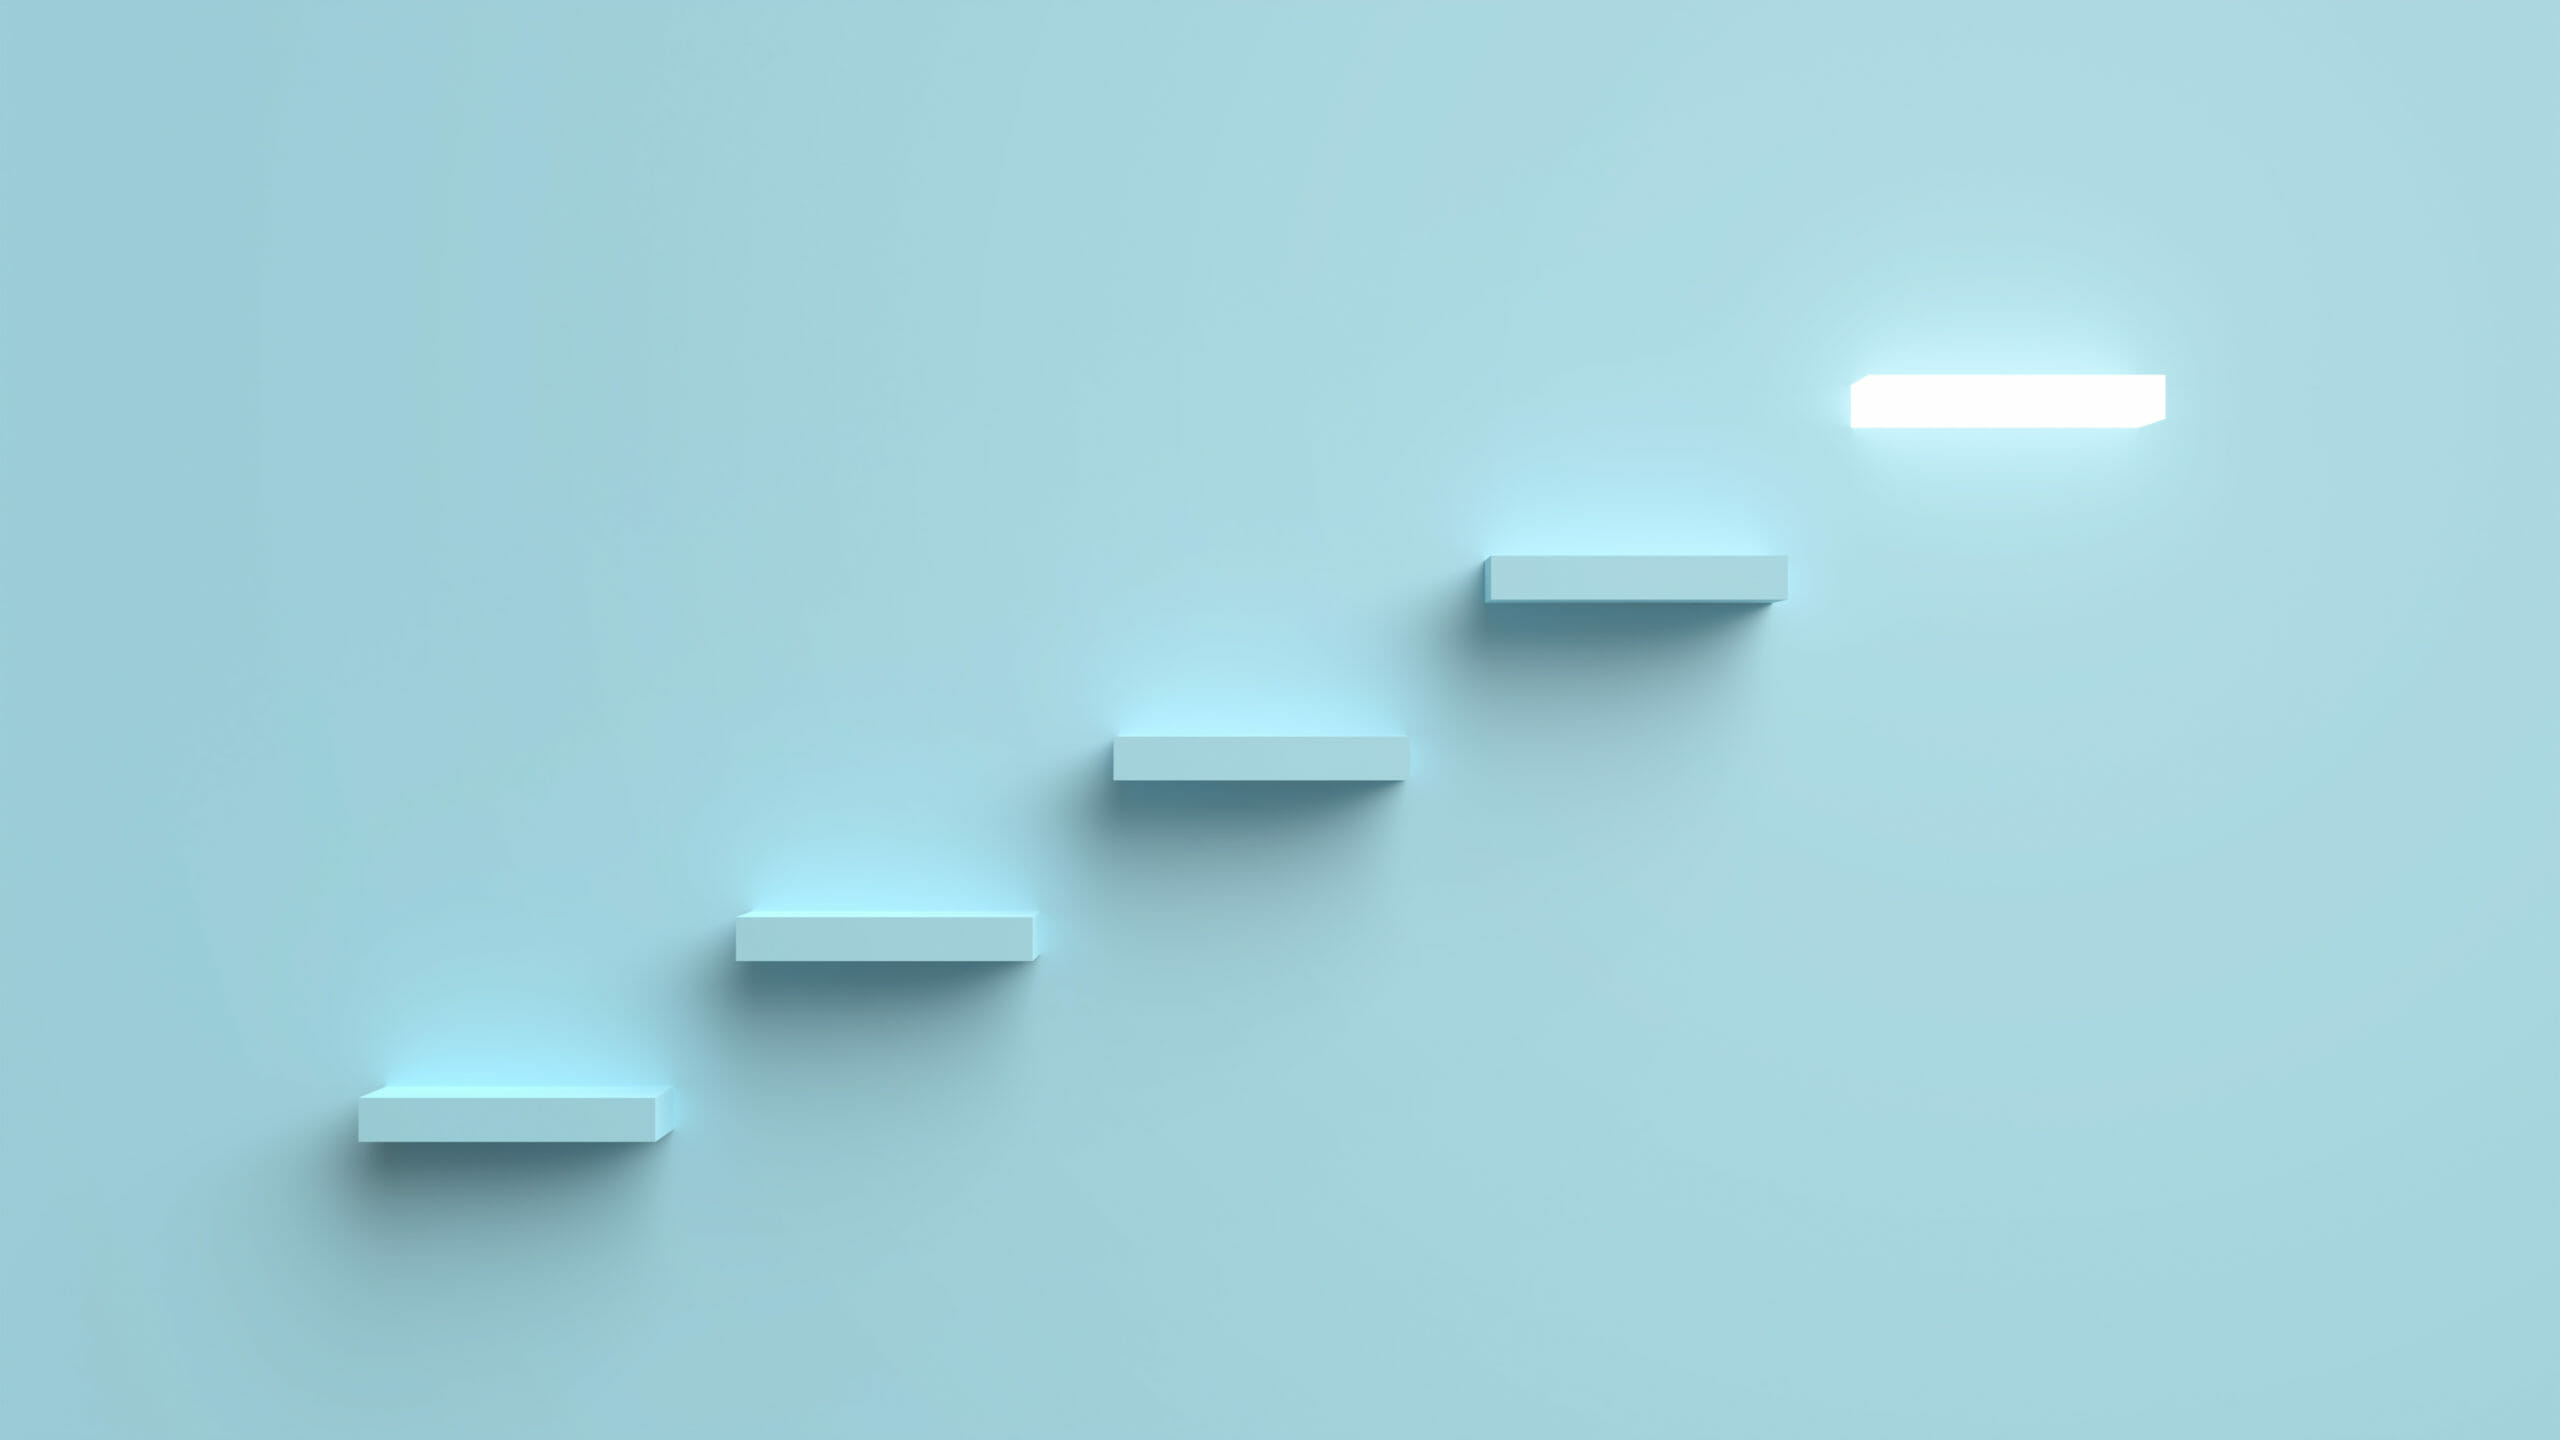 The,Ladder,Of,Success,That,Sparkles.,3d,Render